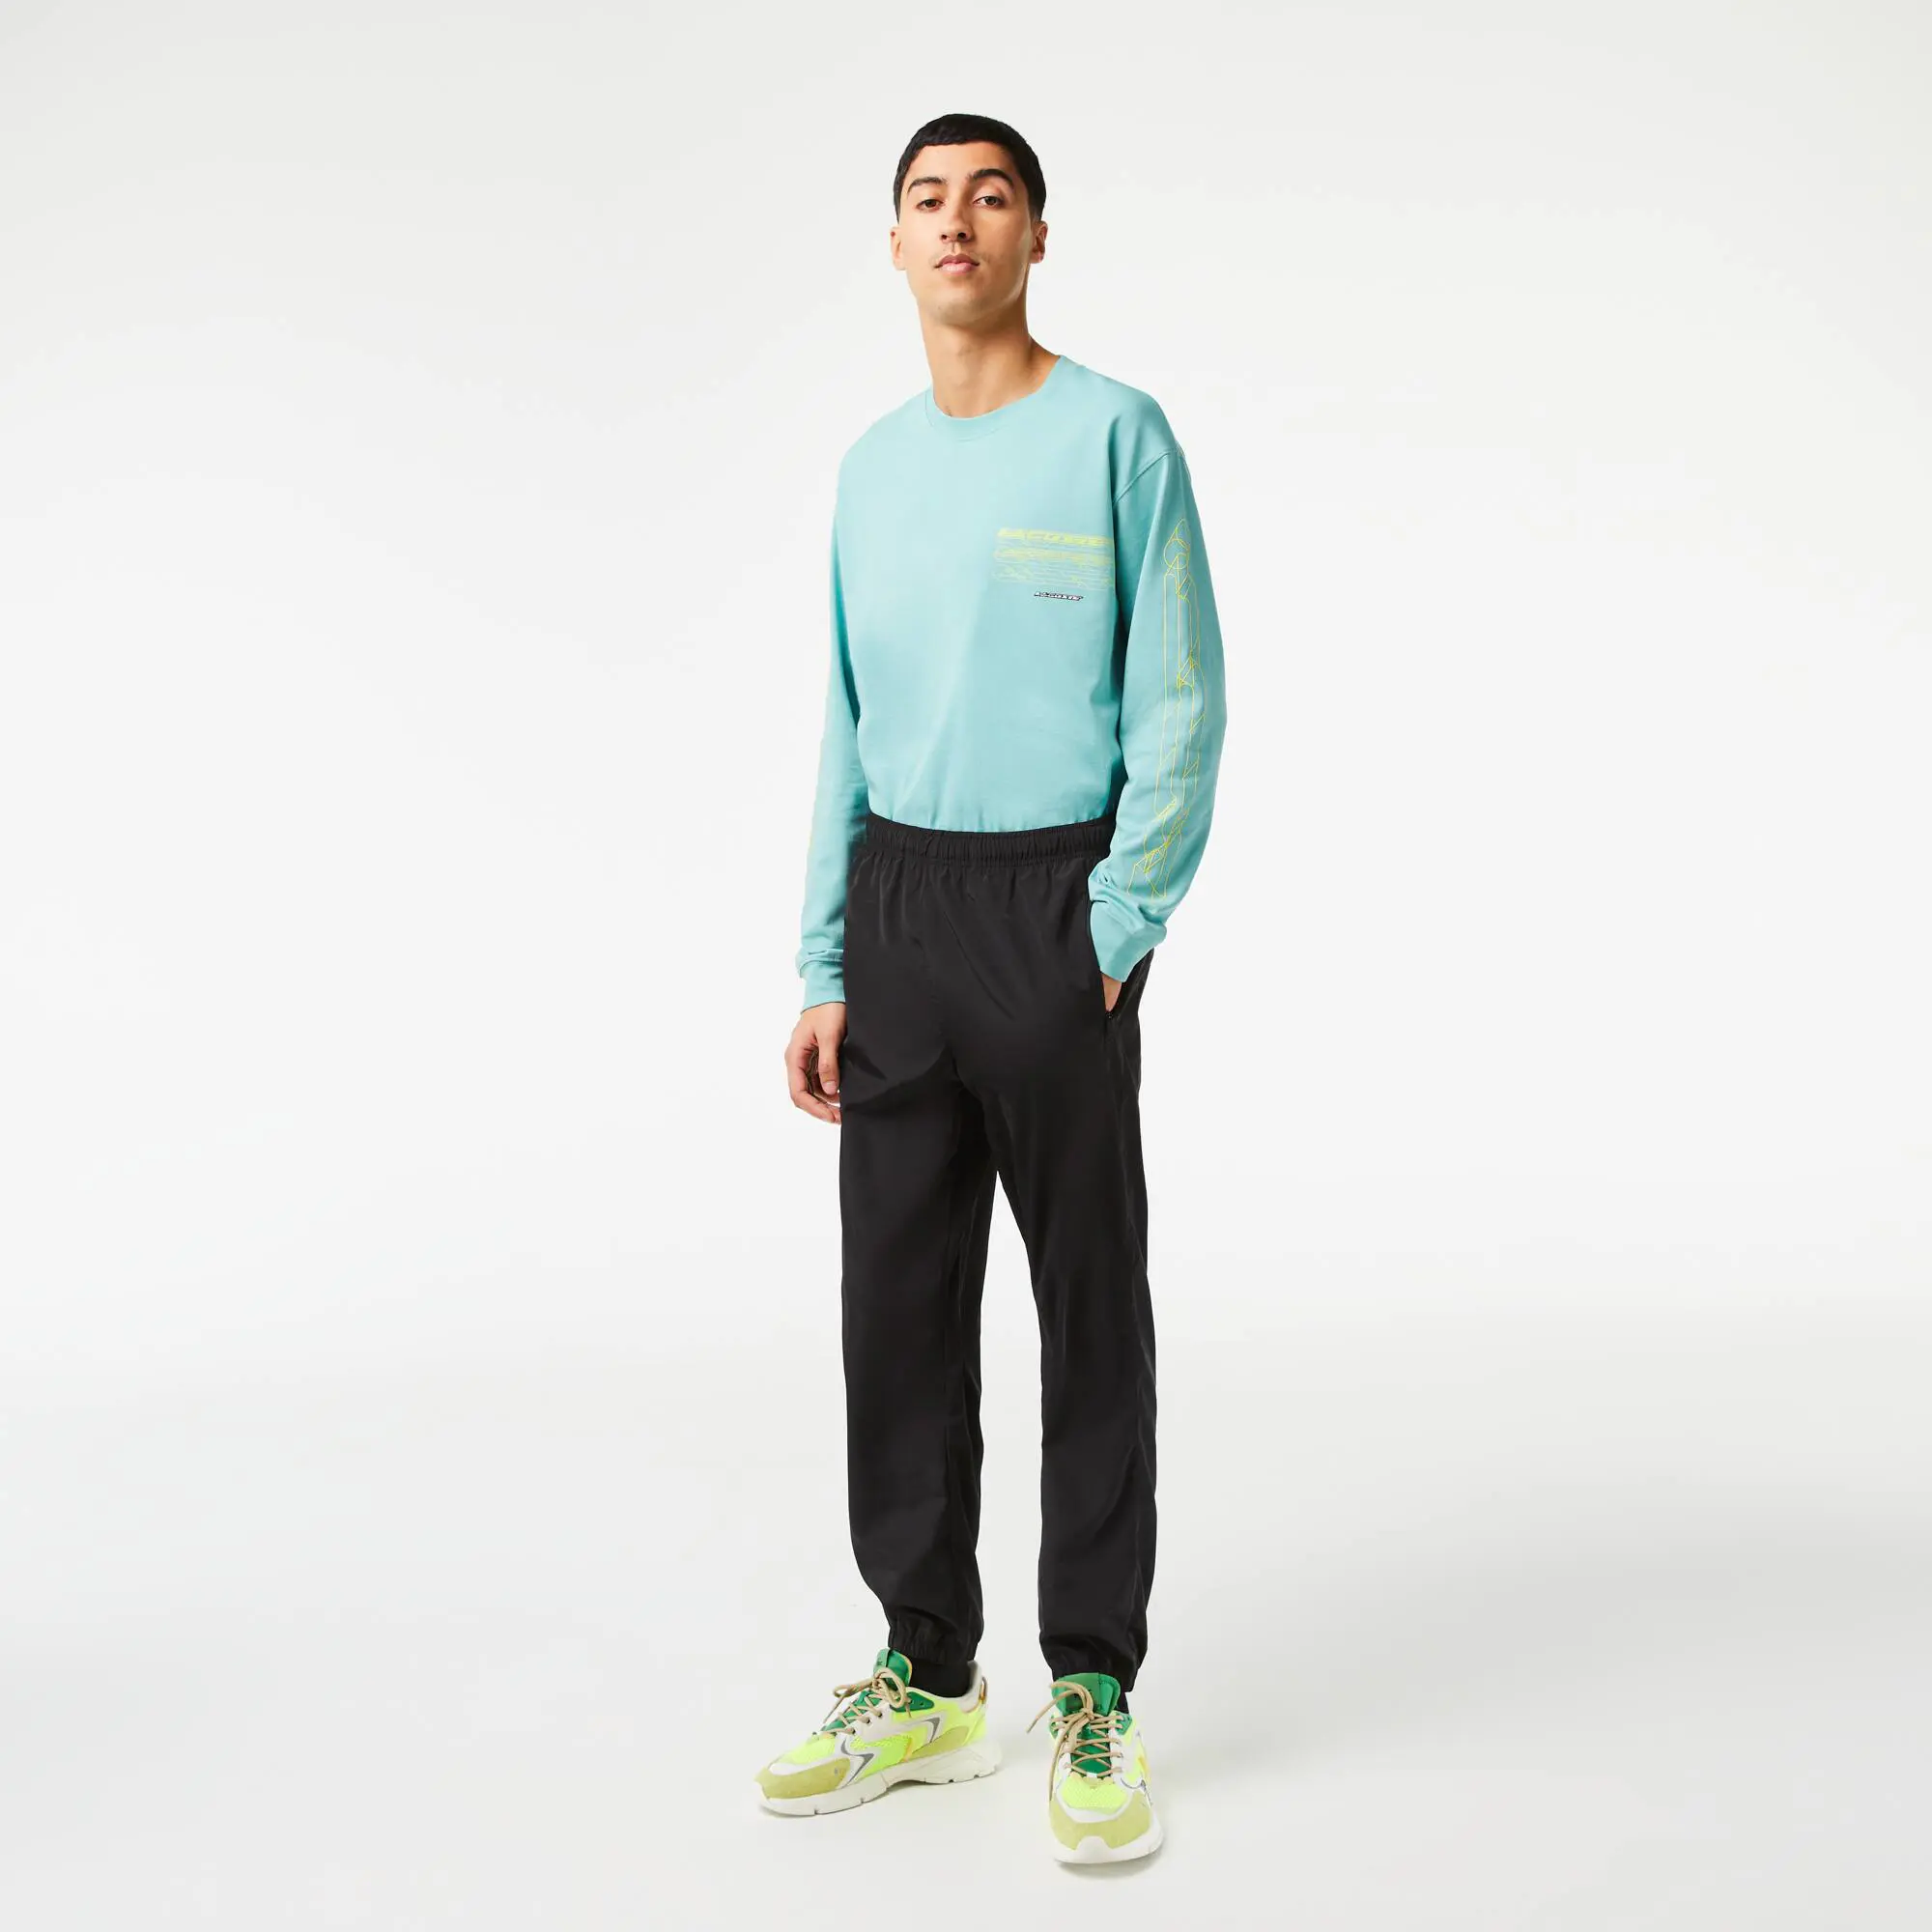 Lacoste Men’s Lacoste Track Pants with GPS Coordinates. 1